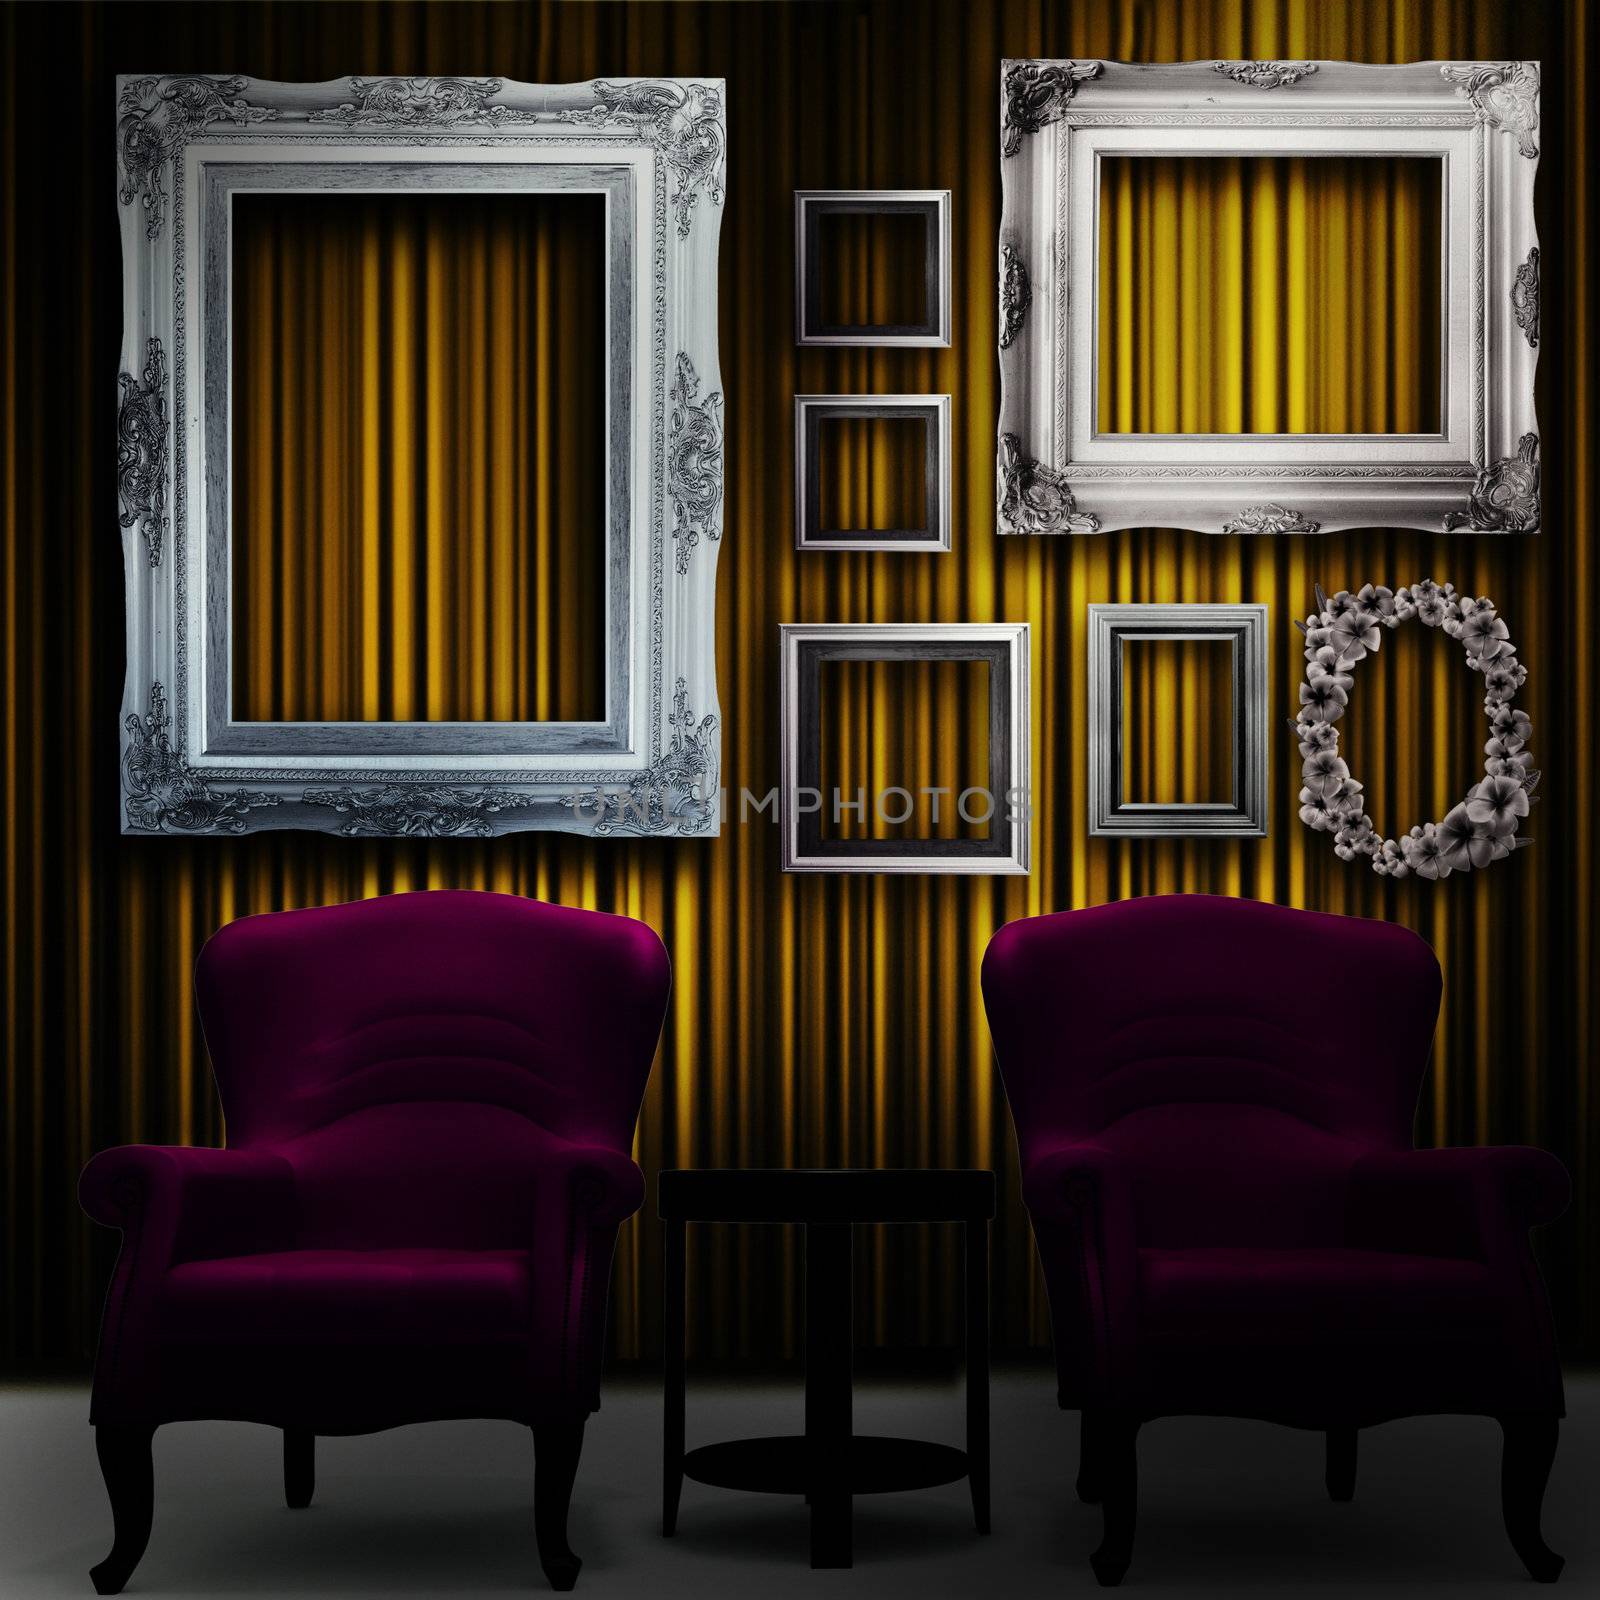 Gallery display - vintage silver frames on curtain wall and violet armchairs